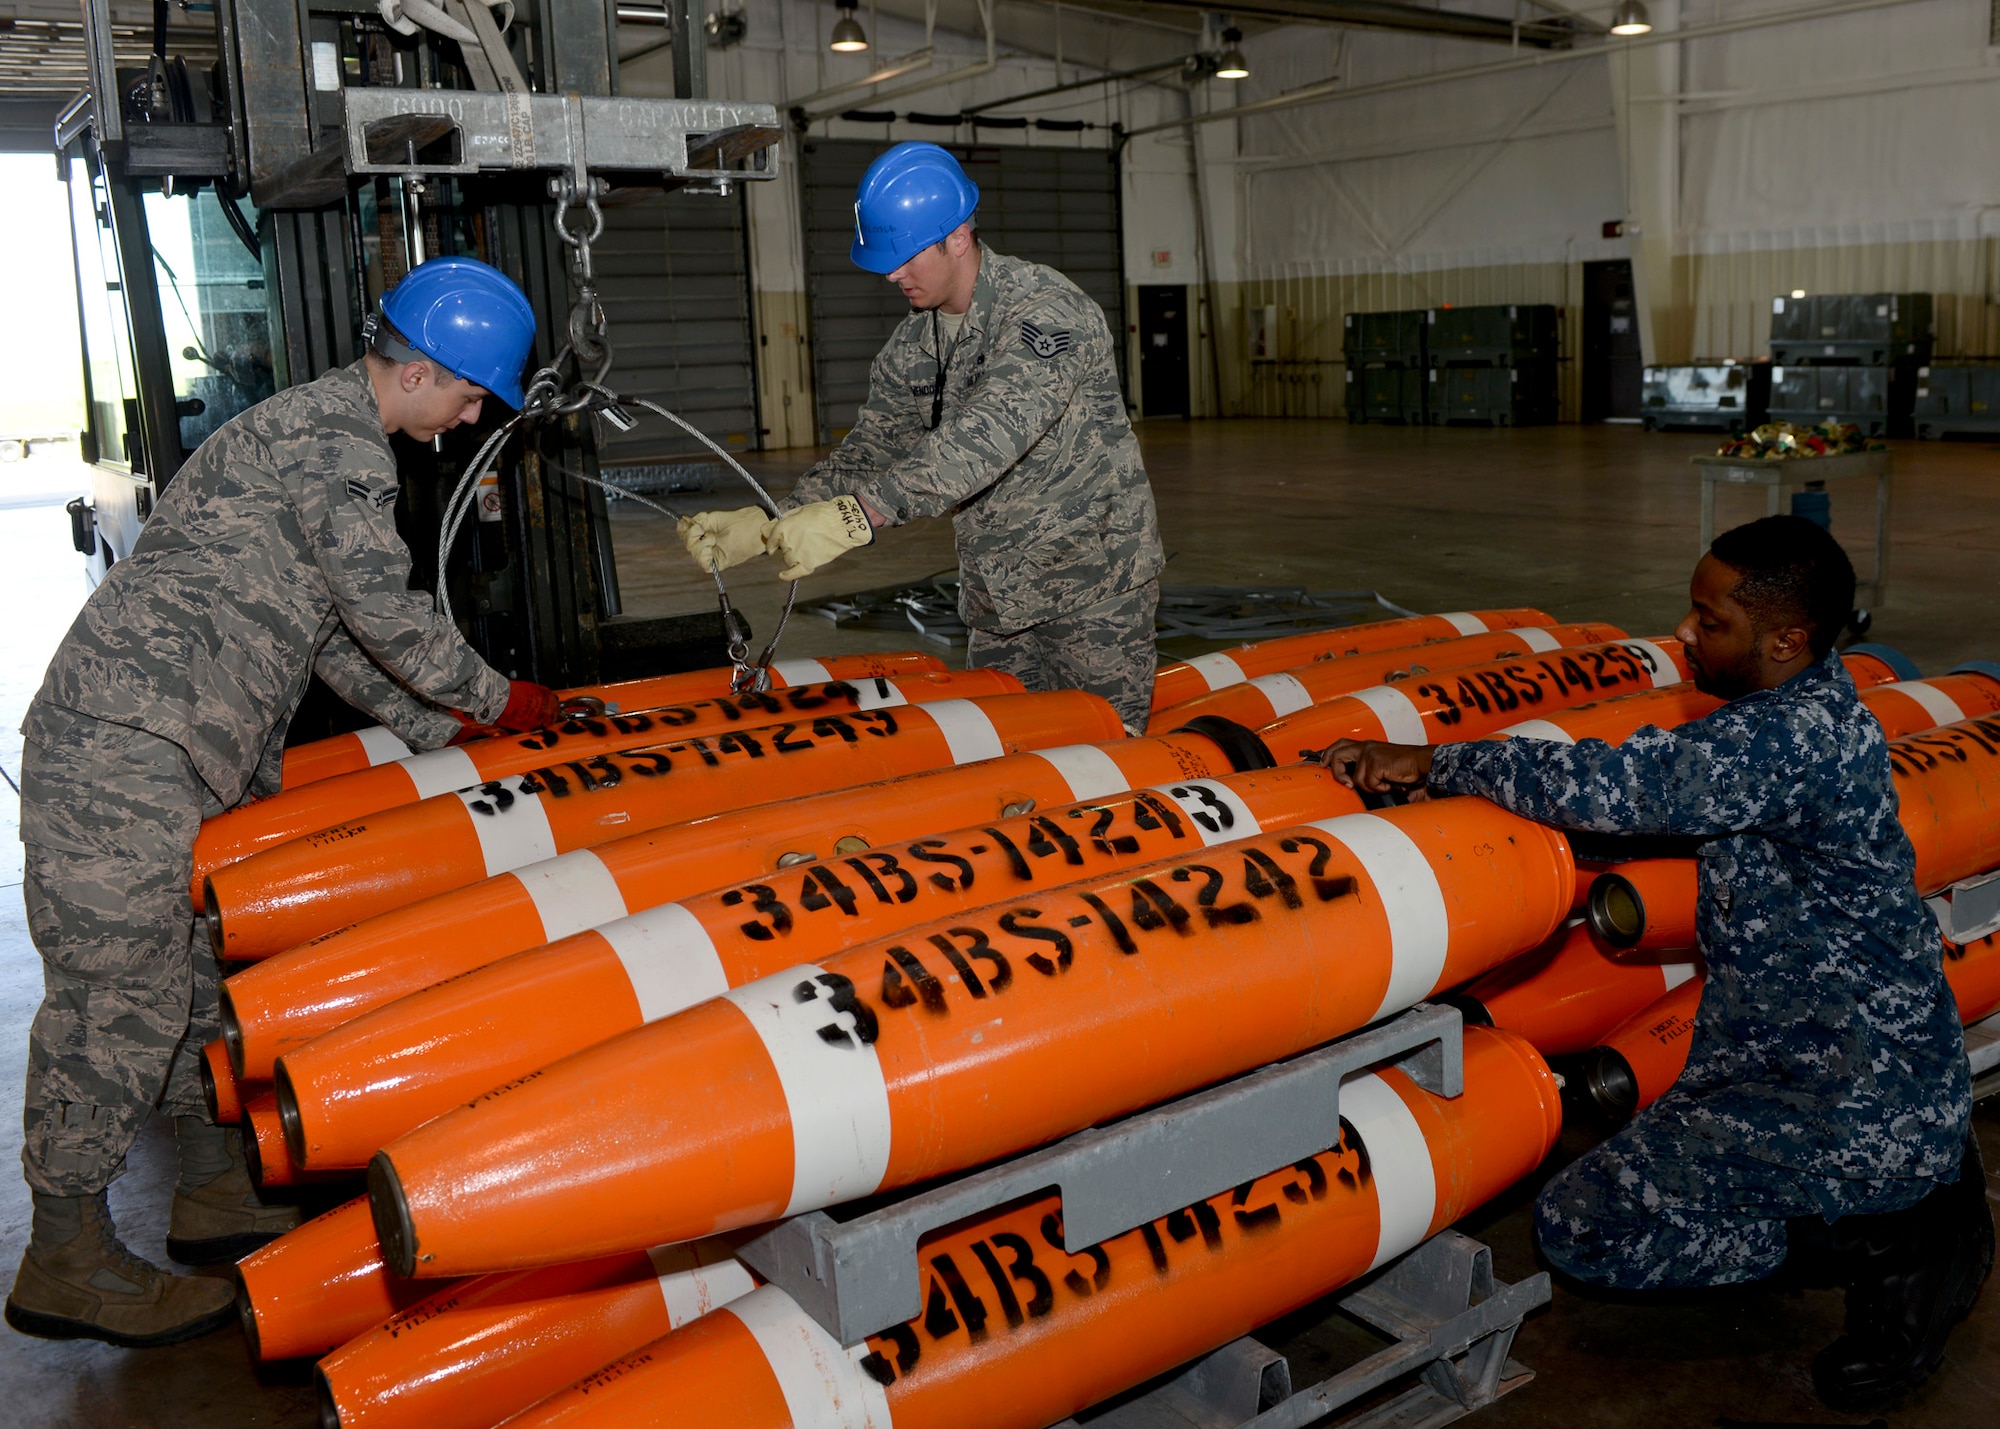 Staff Sgt. Raymond Elmendorf and Airman 1st Class Eric Morrison, 28th Munitions Squadron conventional maintenance crew members, assist Petty Officer 2nd Class Dwight Moore, Naval Munitions Command Seal Beach mineman, with loading Mk-62 Quickstrike mines onto munitions carts at Ellsworth Air Force Base, S.D., June 2, 2014. (Air Force photo/Senior Airman Anania Tedurio)